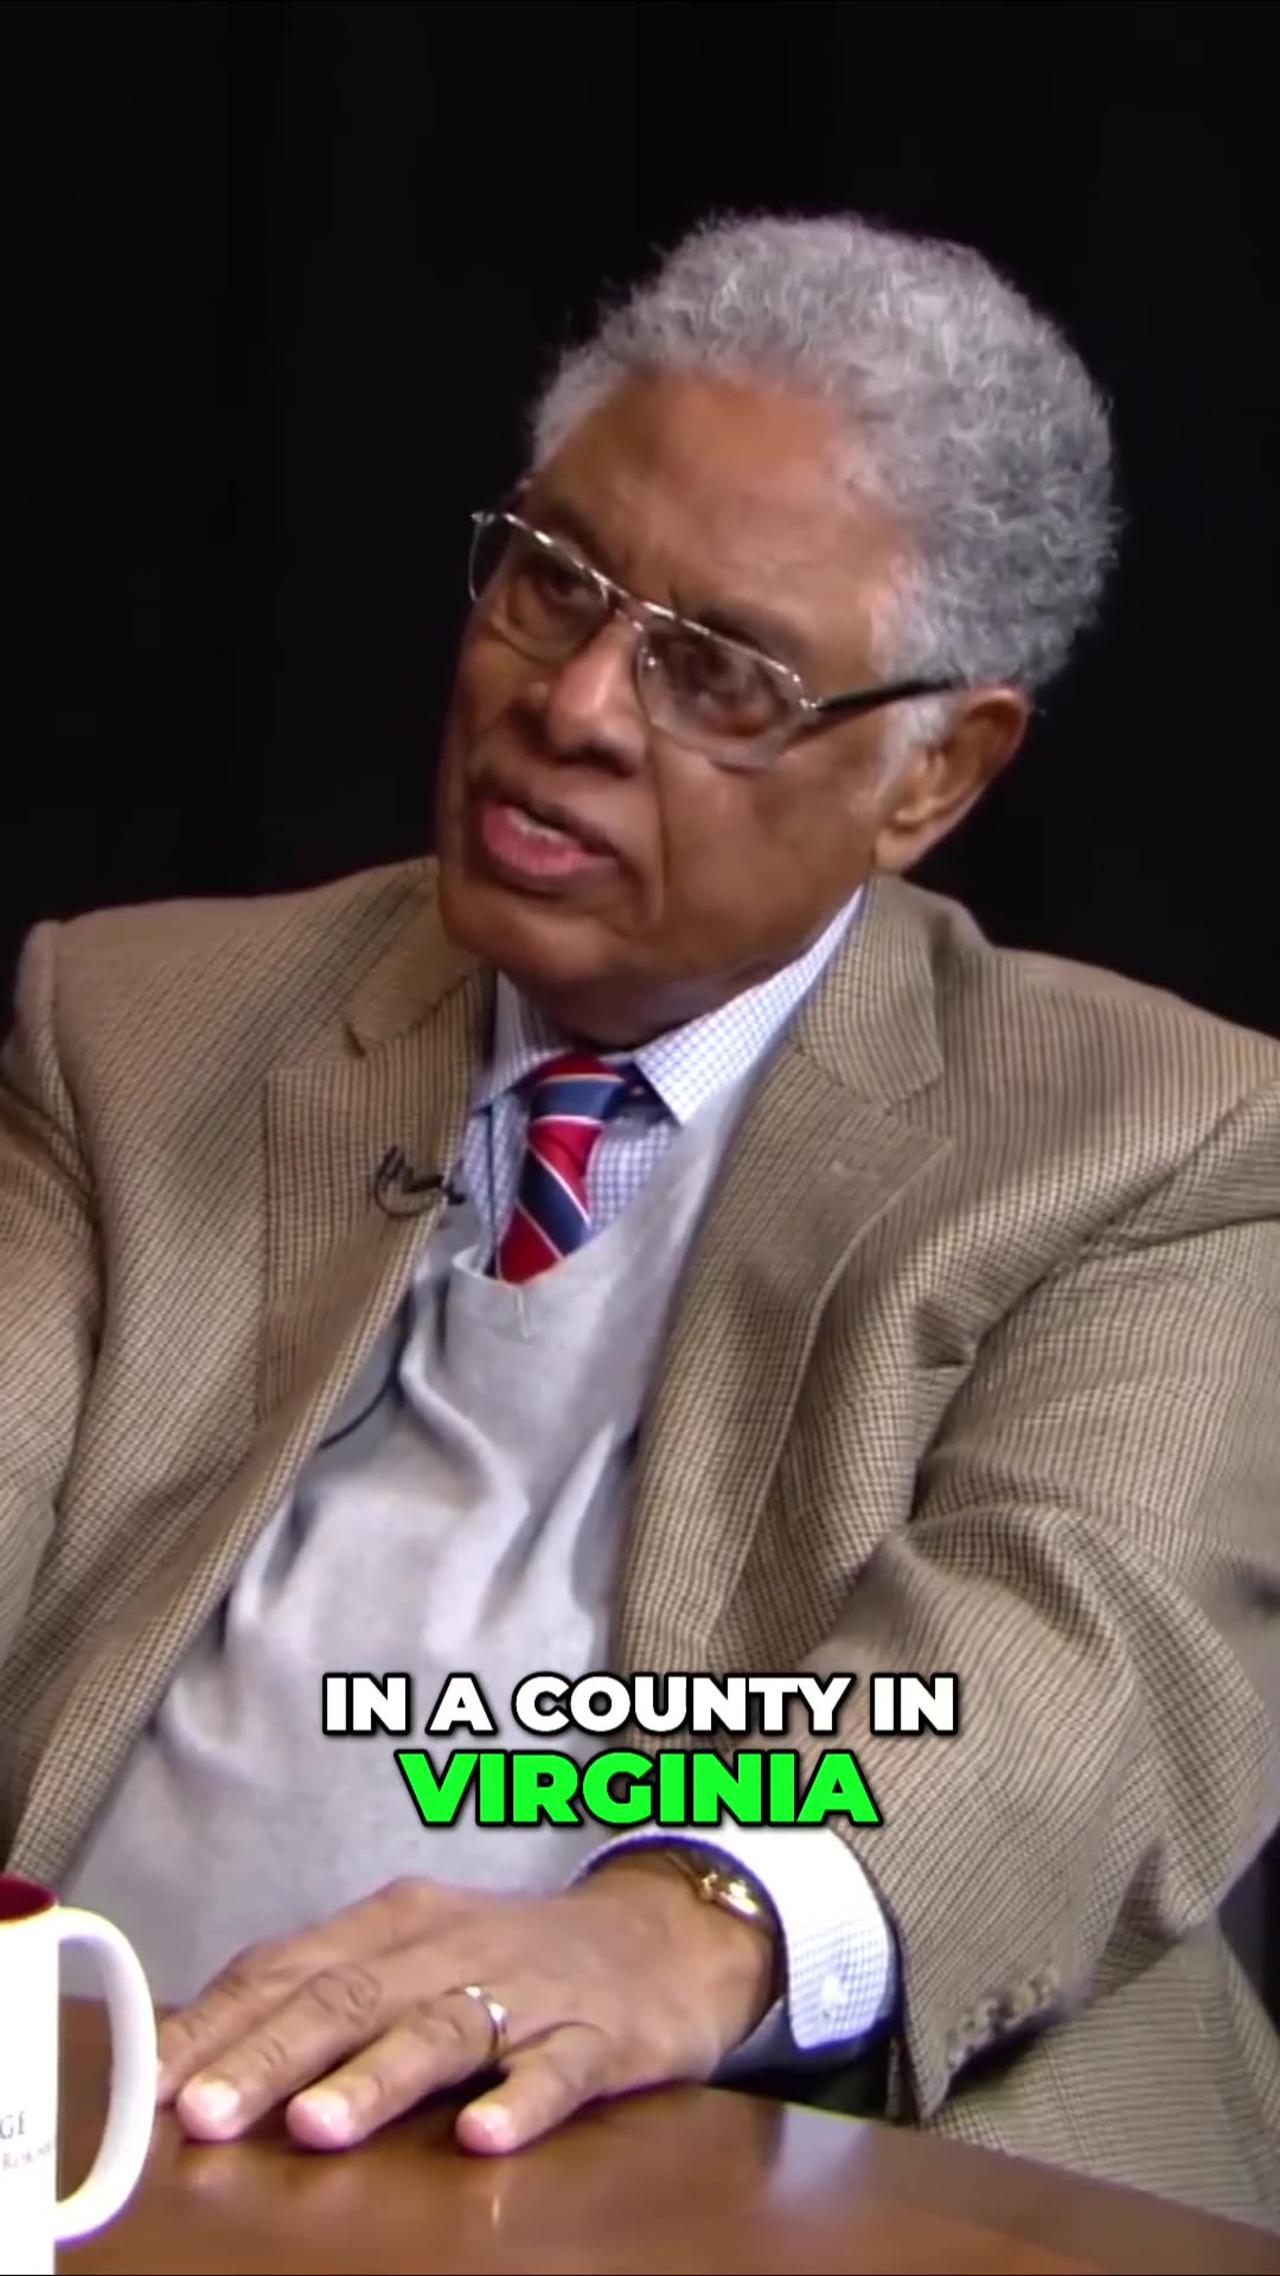 Thomas Sowell Explains: The Link Between Isolation, Mountain Communities, and Poverty